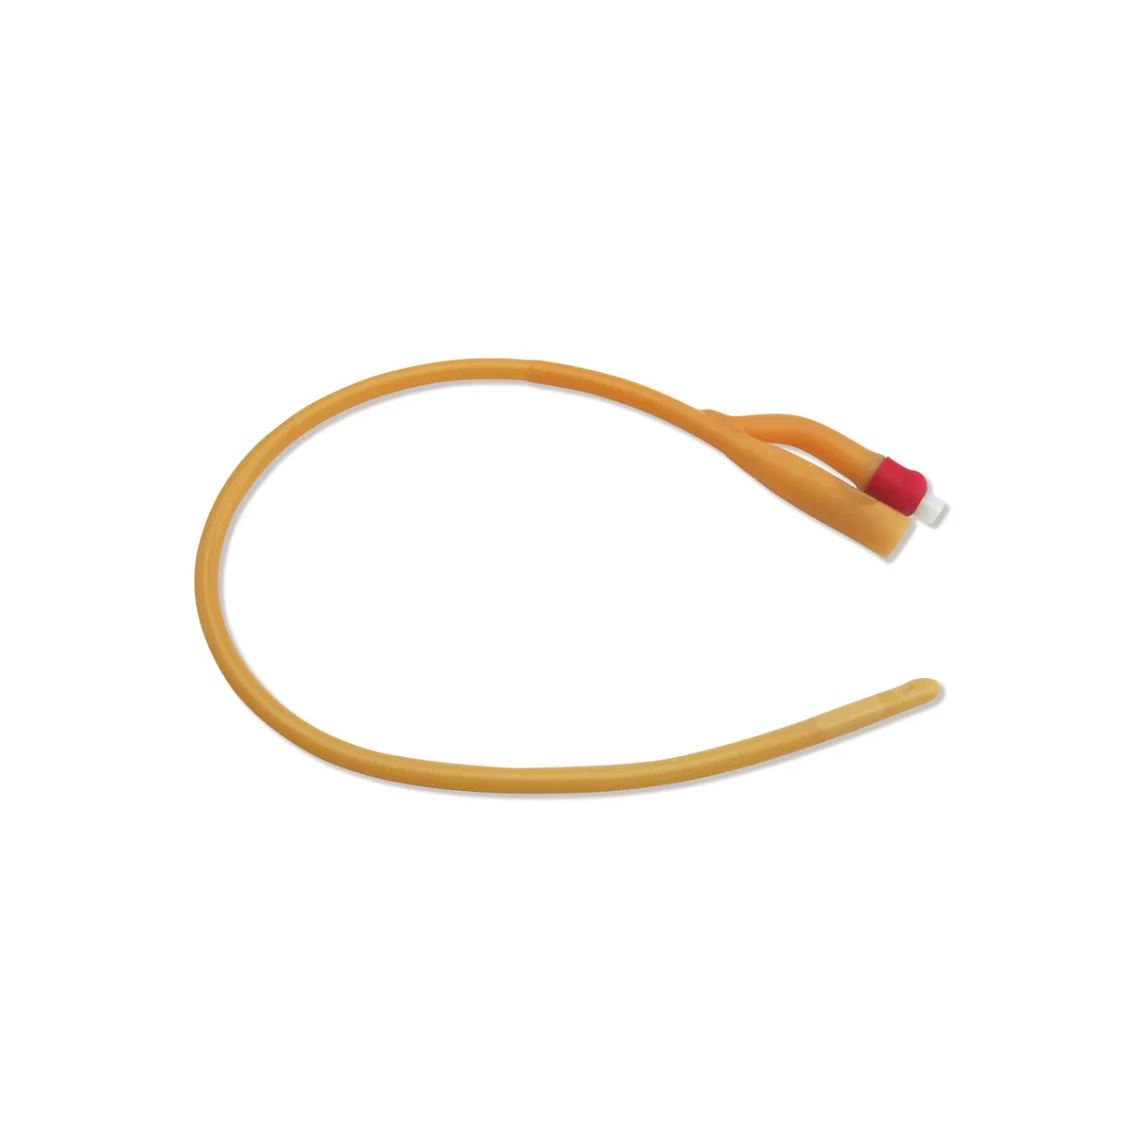 First product image of 2 Way Foley Baloon Catheter (Latex) 12gauge